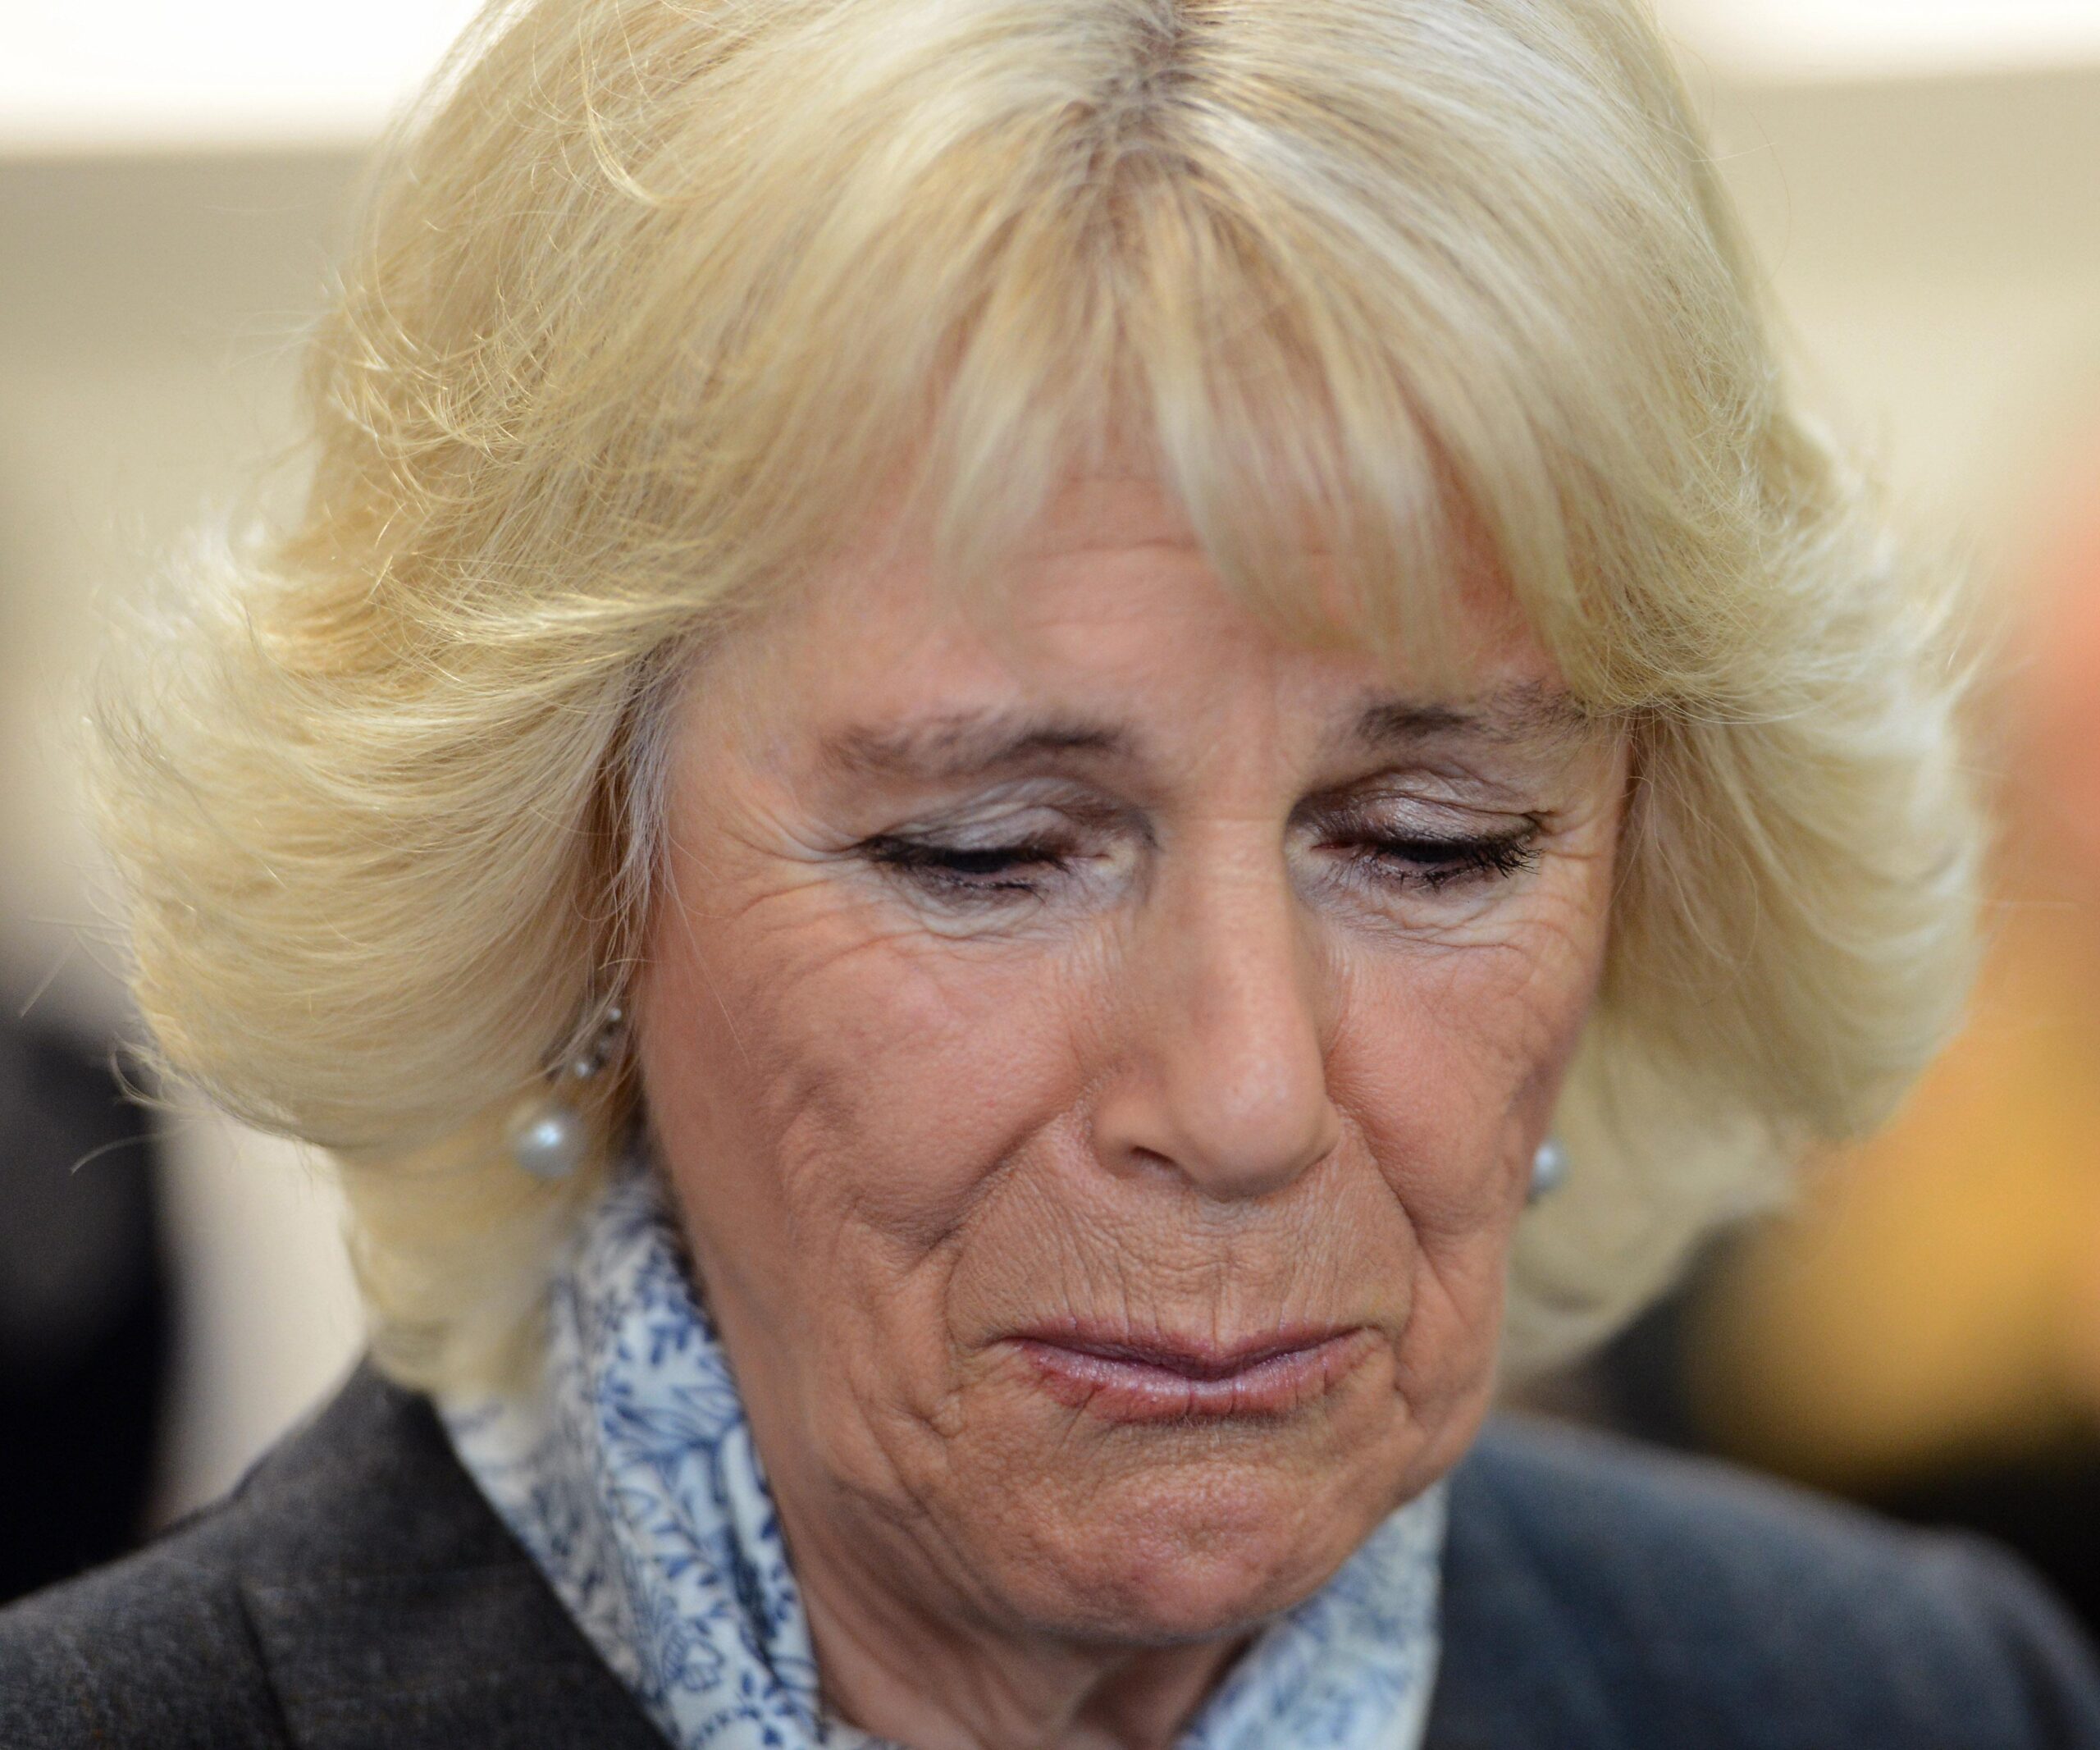 Camilla sheds a tear for victims of domestic violence